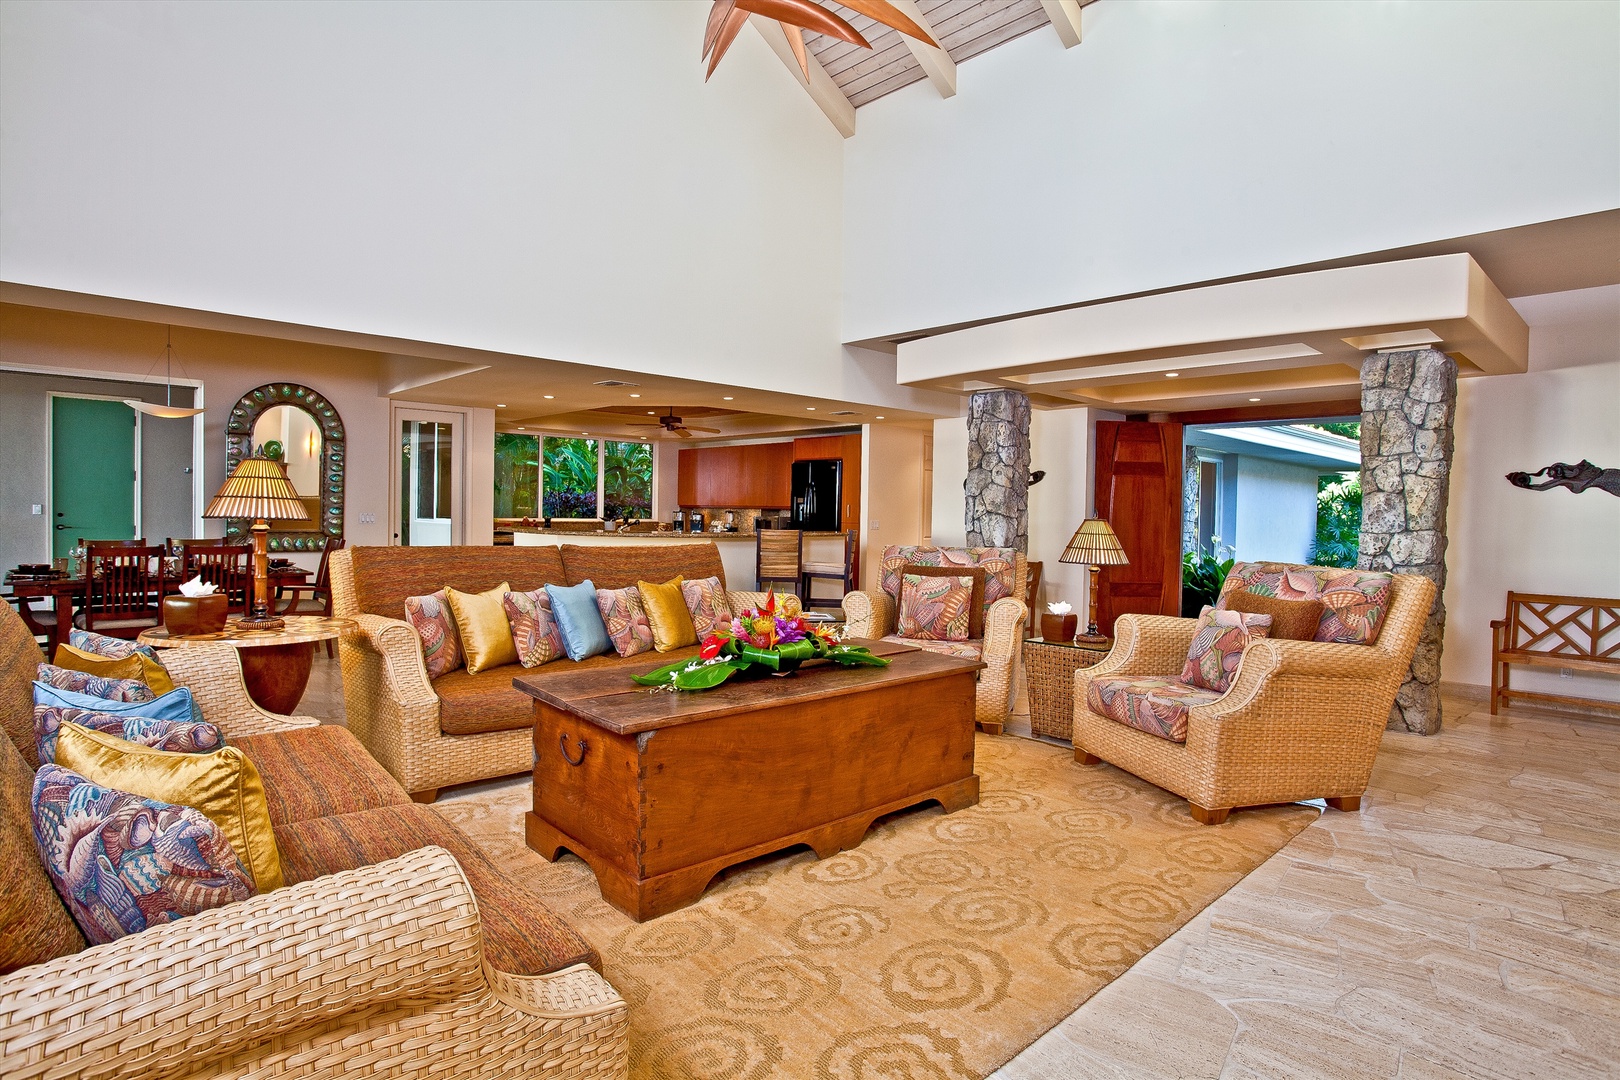 Kaanapali Vacation Rentals, Sea Shells Beach House on Ka`anapali Beach* - The Great Room with Vaulted Ceiling and New 60" Television with iPod Dock and BluRay Player